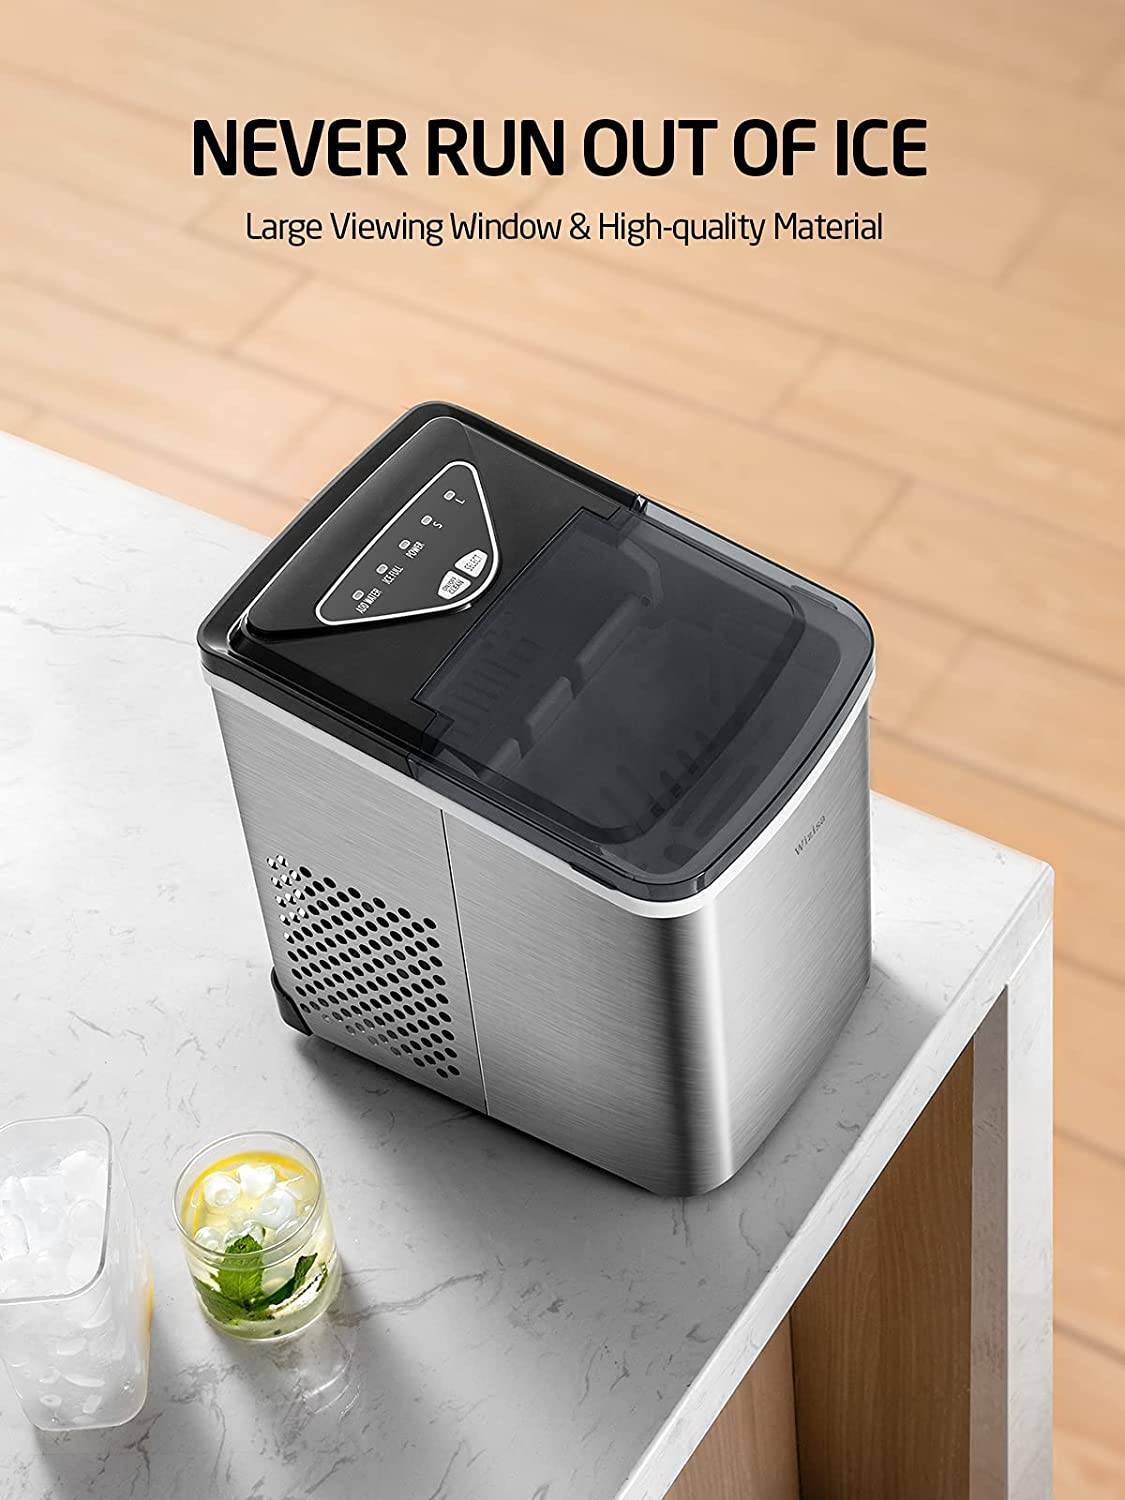 Igloo Igliceb26hnss 26-Pound Automatic Self-Cleaning Portable Countertop Ice Maker Machine with Handle, Stainless Steel